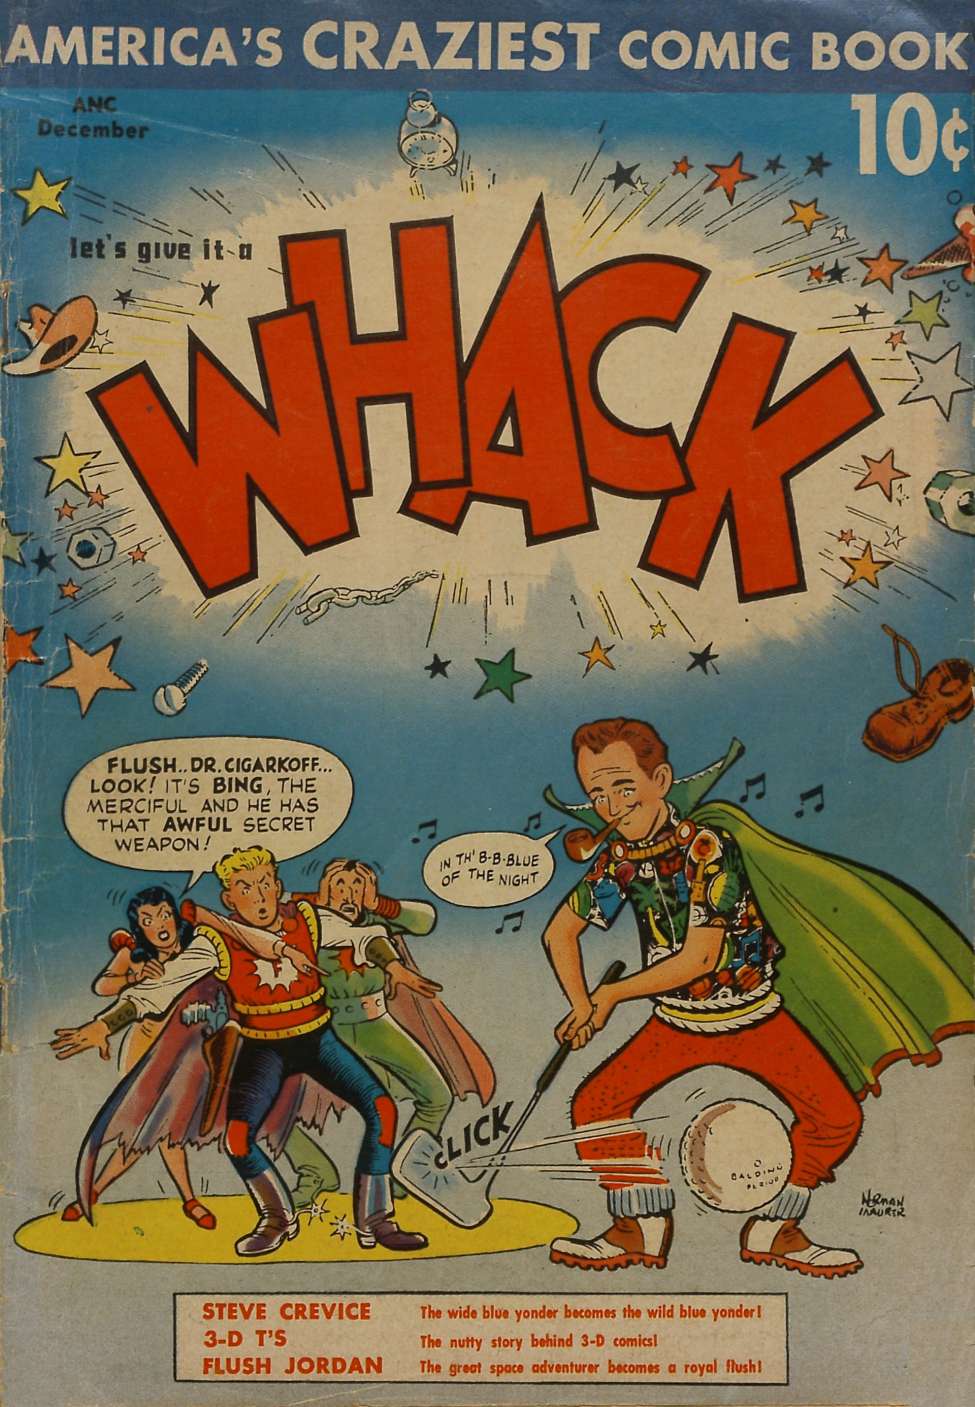 Comic Book Cover For Whack 2 (alt)